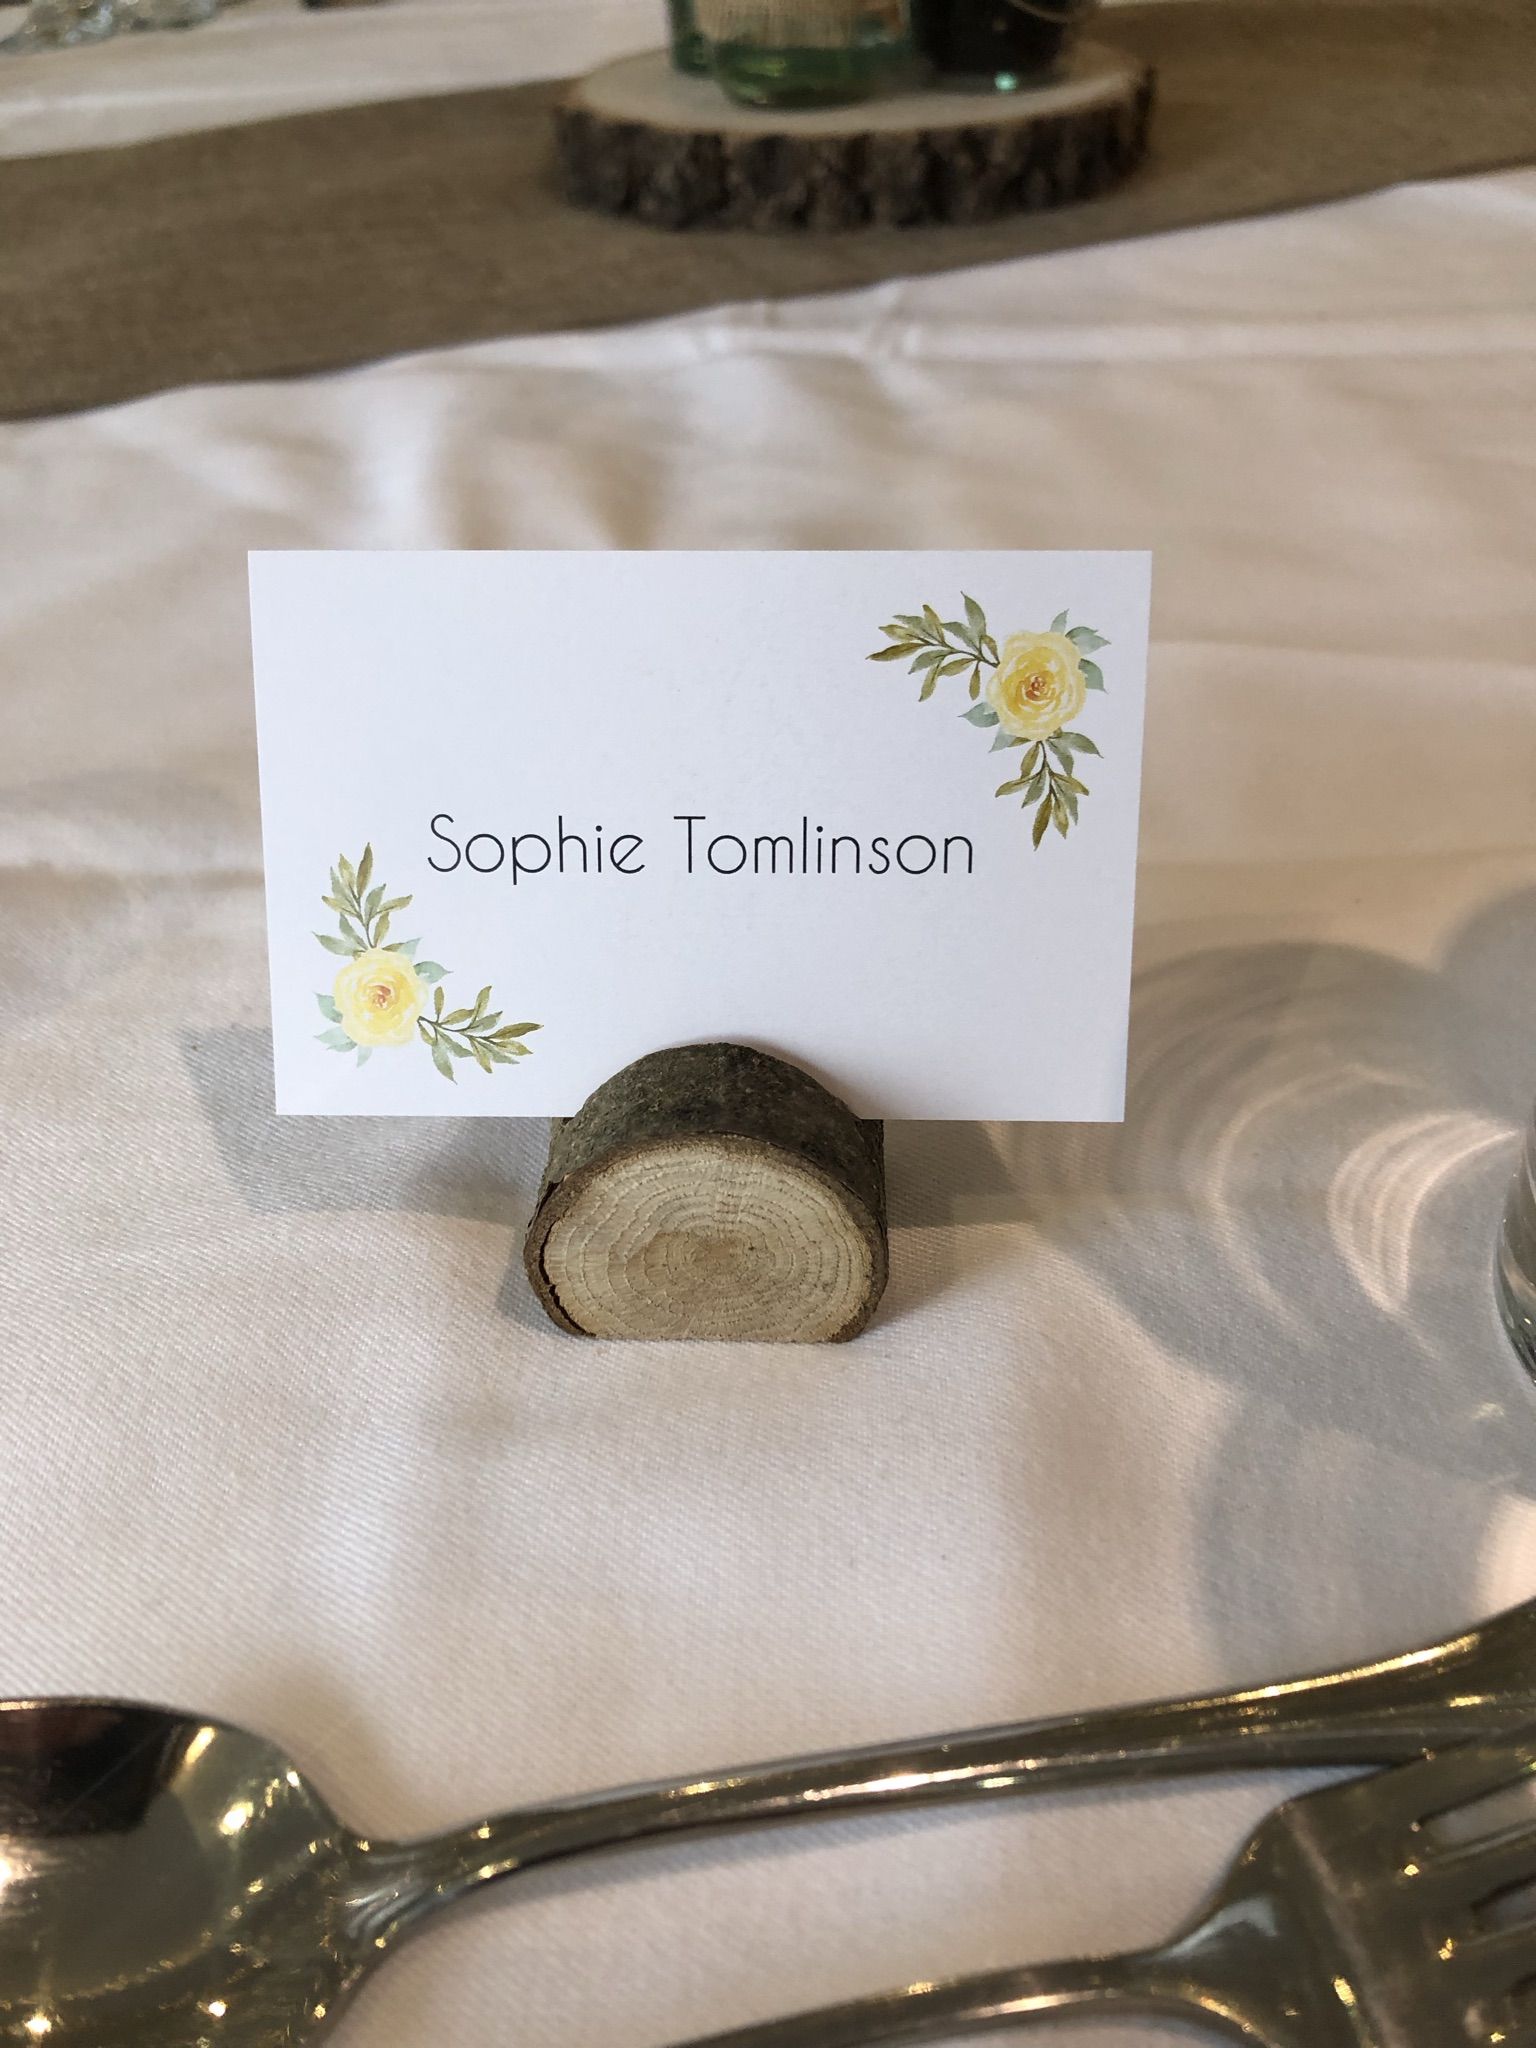 a place setting with a place card and silverware.